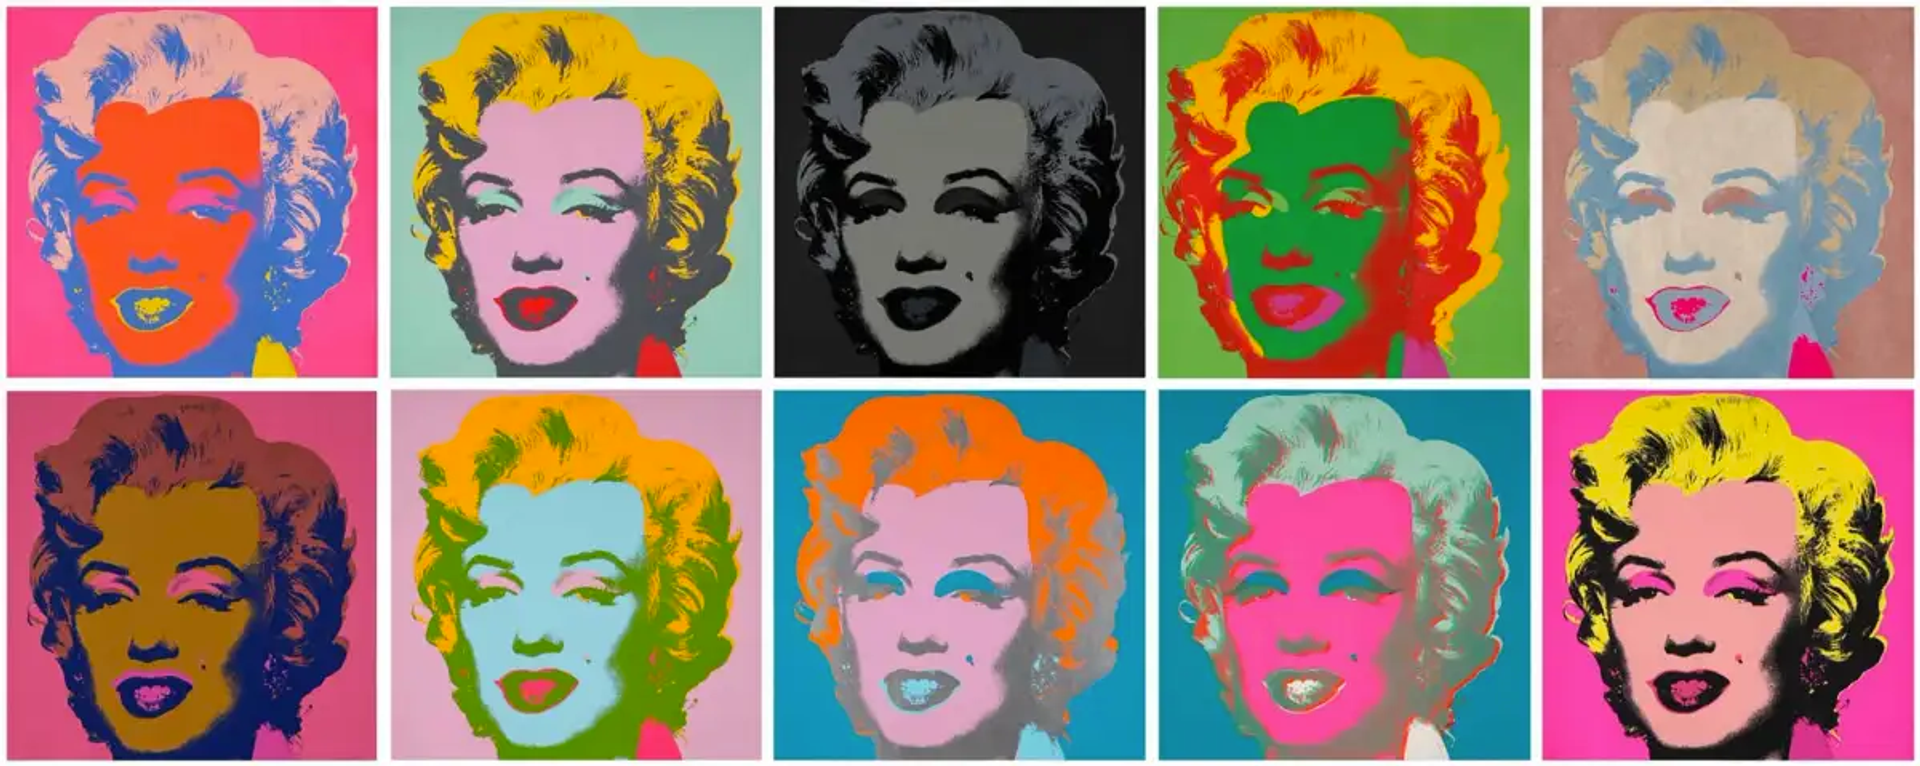 Andy Warhol's Marilyn Monroe: The Most Famous Face in Hollywood